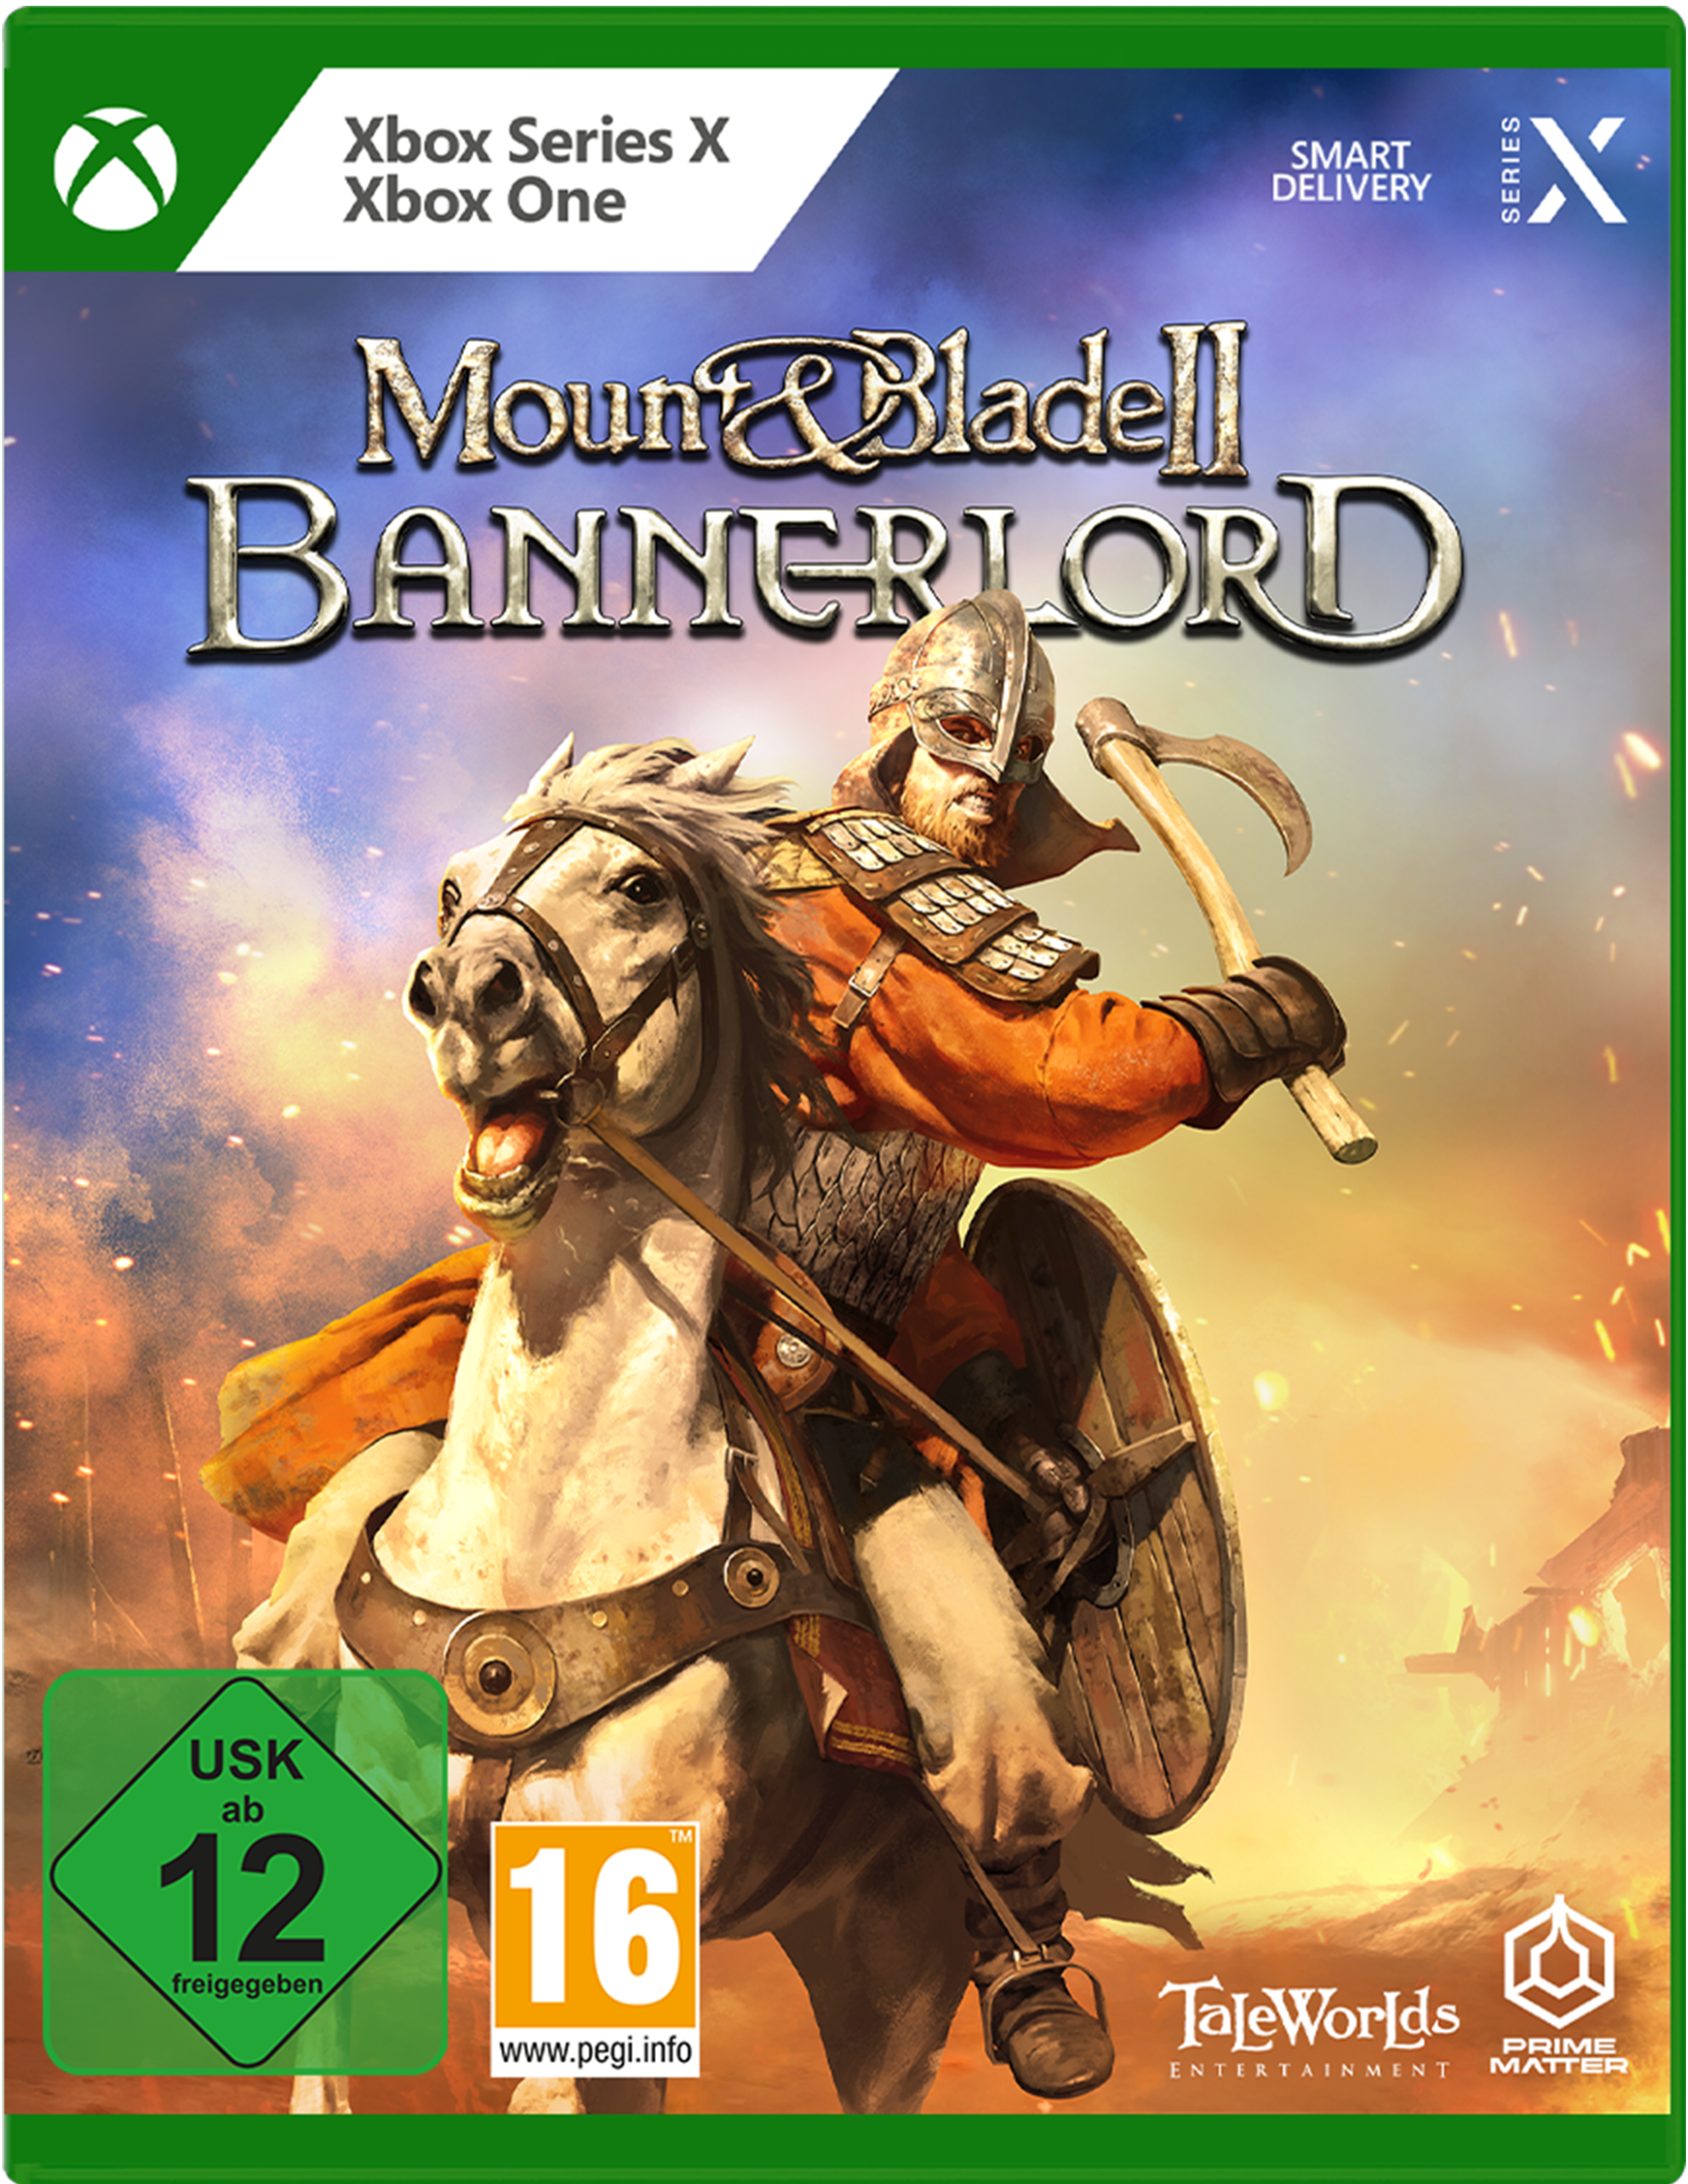 Series One [Xbox Bannerlord Xbox 2: X] - Mount Blade & &